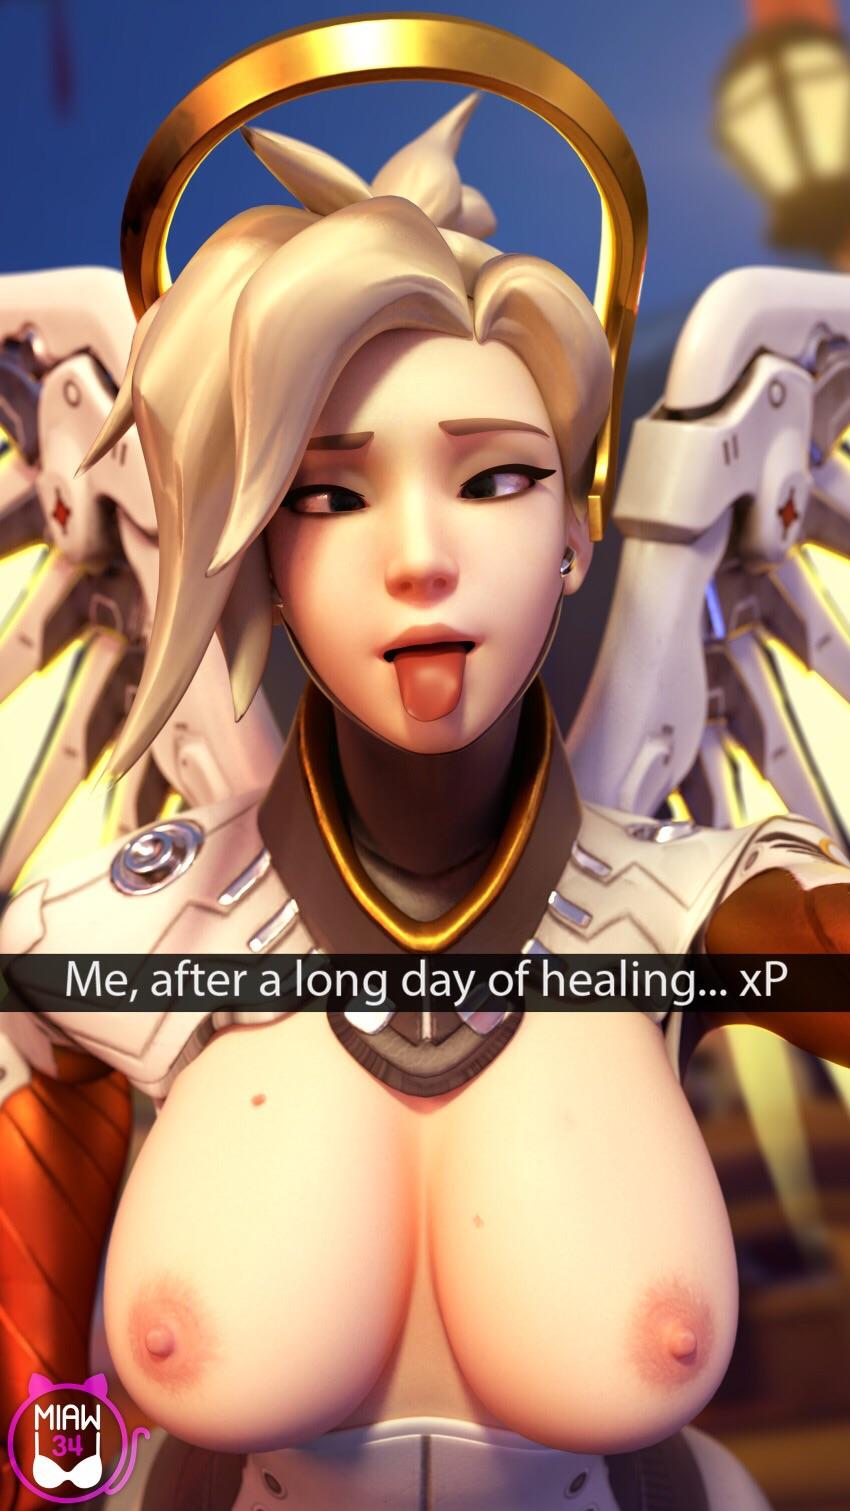 “#Mercy - https://t.co/PAedh6JFnS #Miaw34 #Overwatch #nsfw #rule34 #r34 #po...